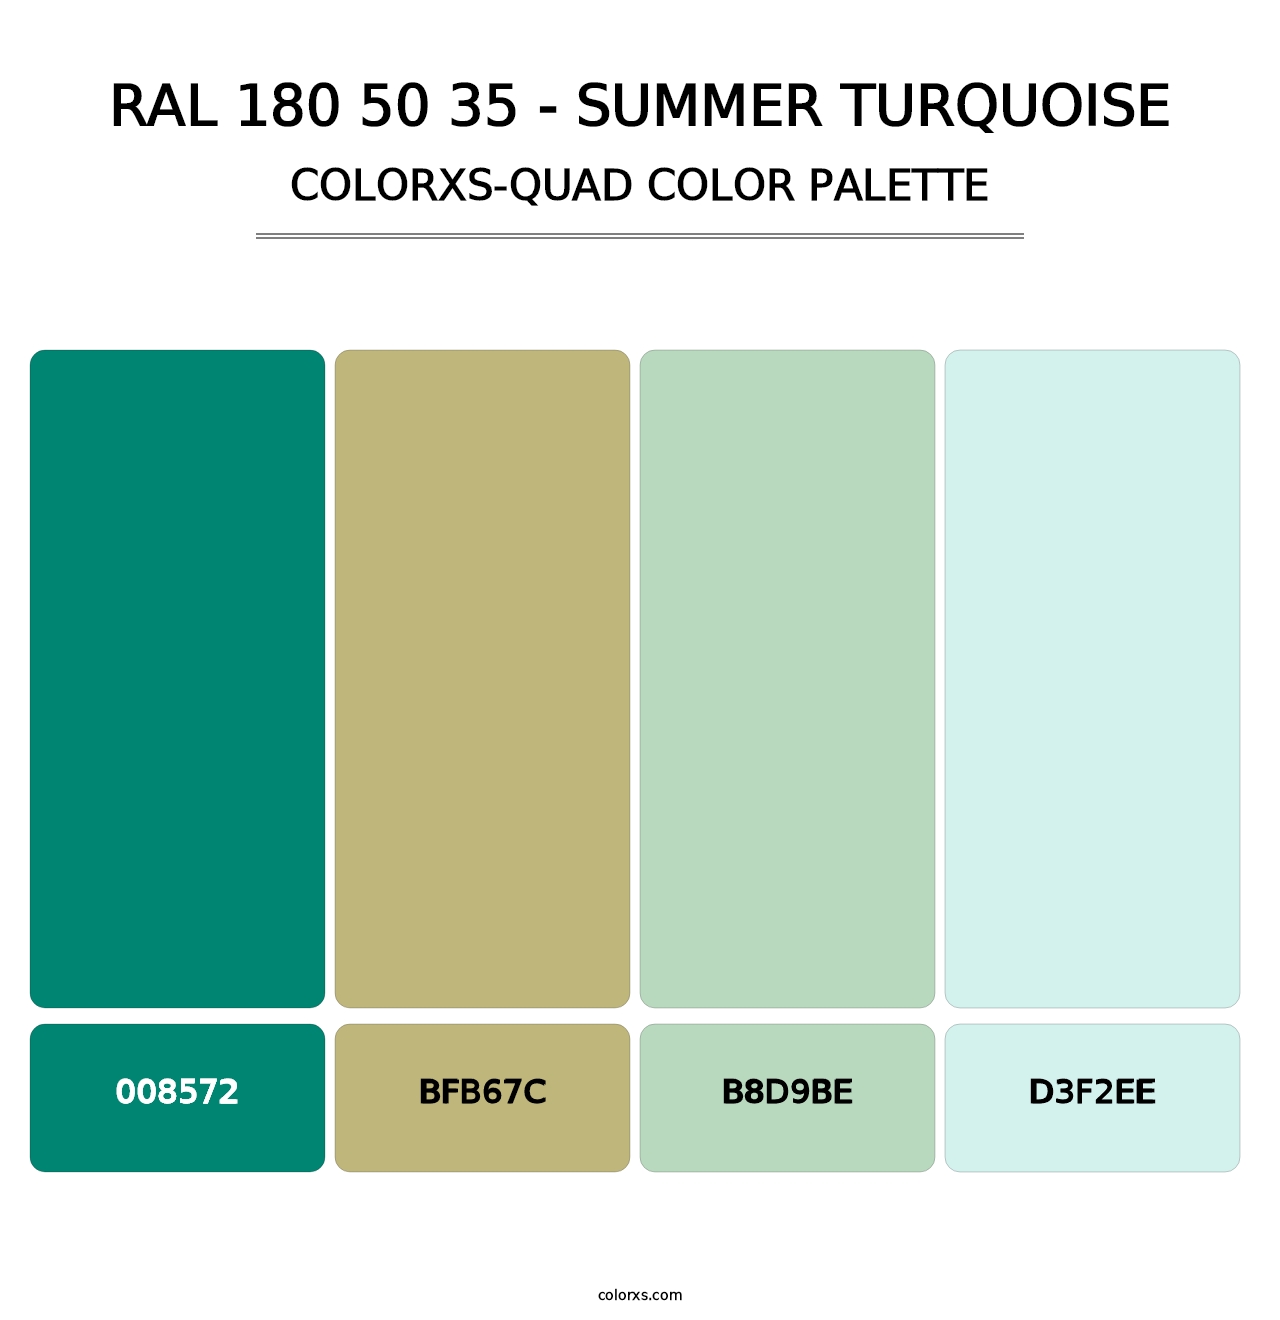 RAL 180 50 35 - Summer Turquoise - Colorxs Quad Palette